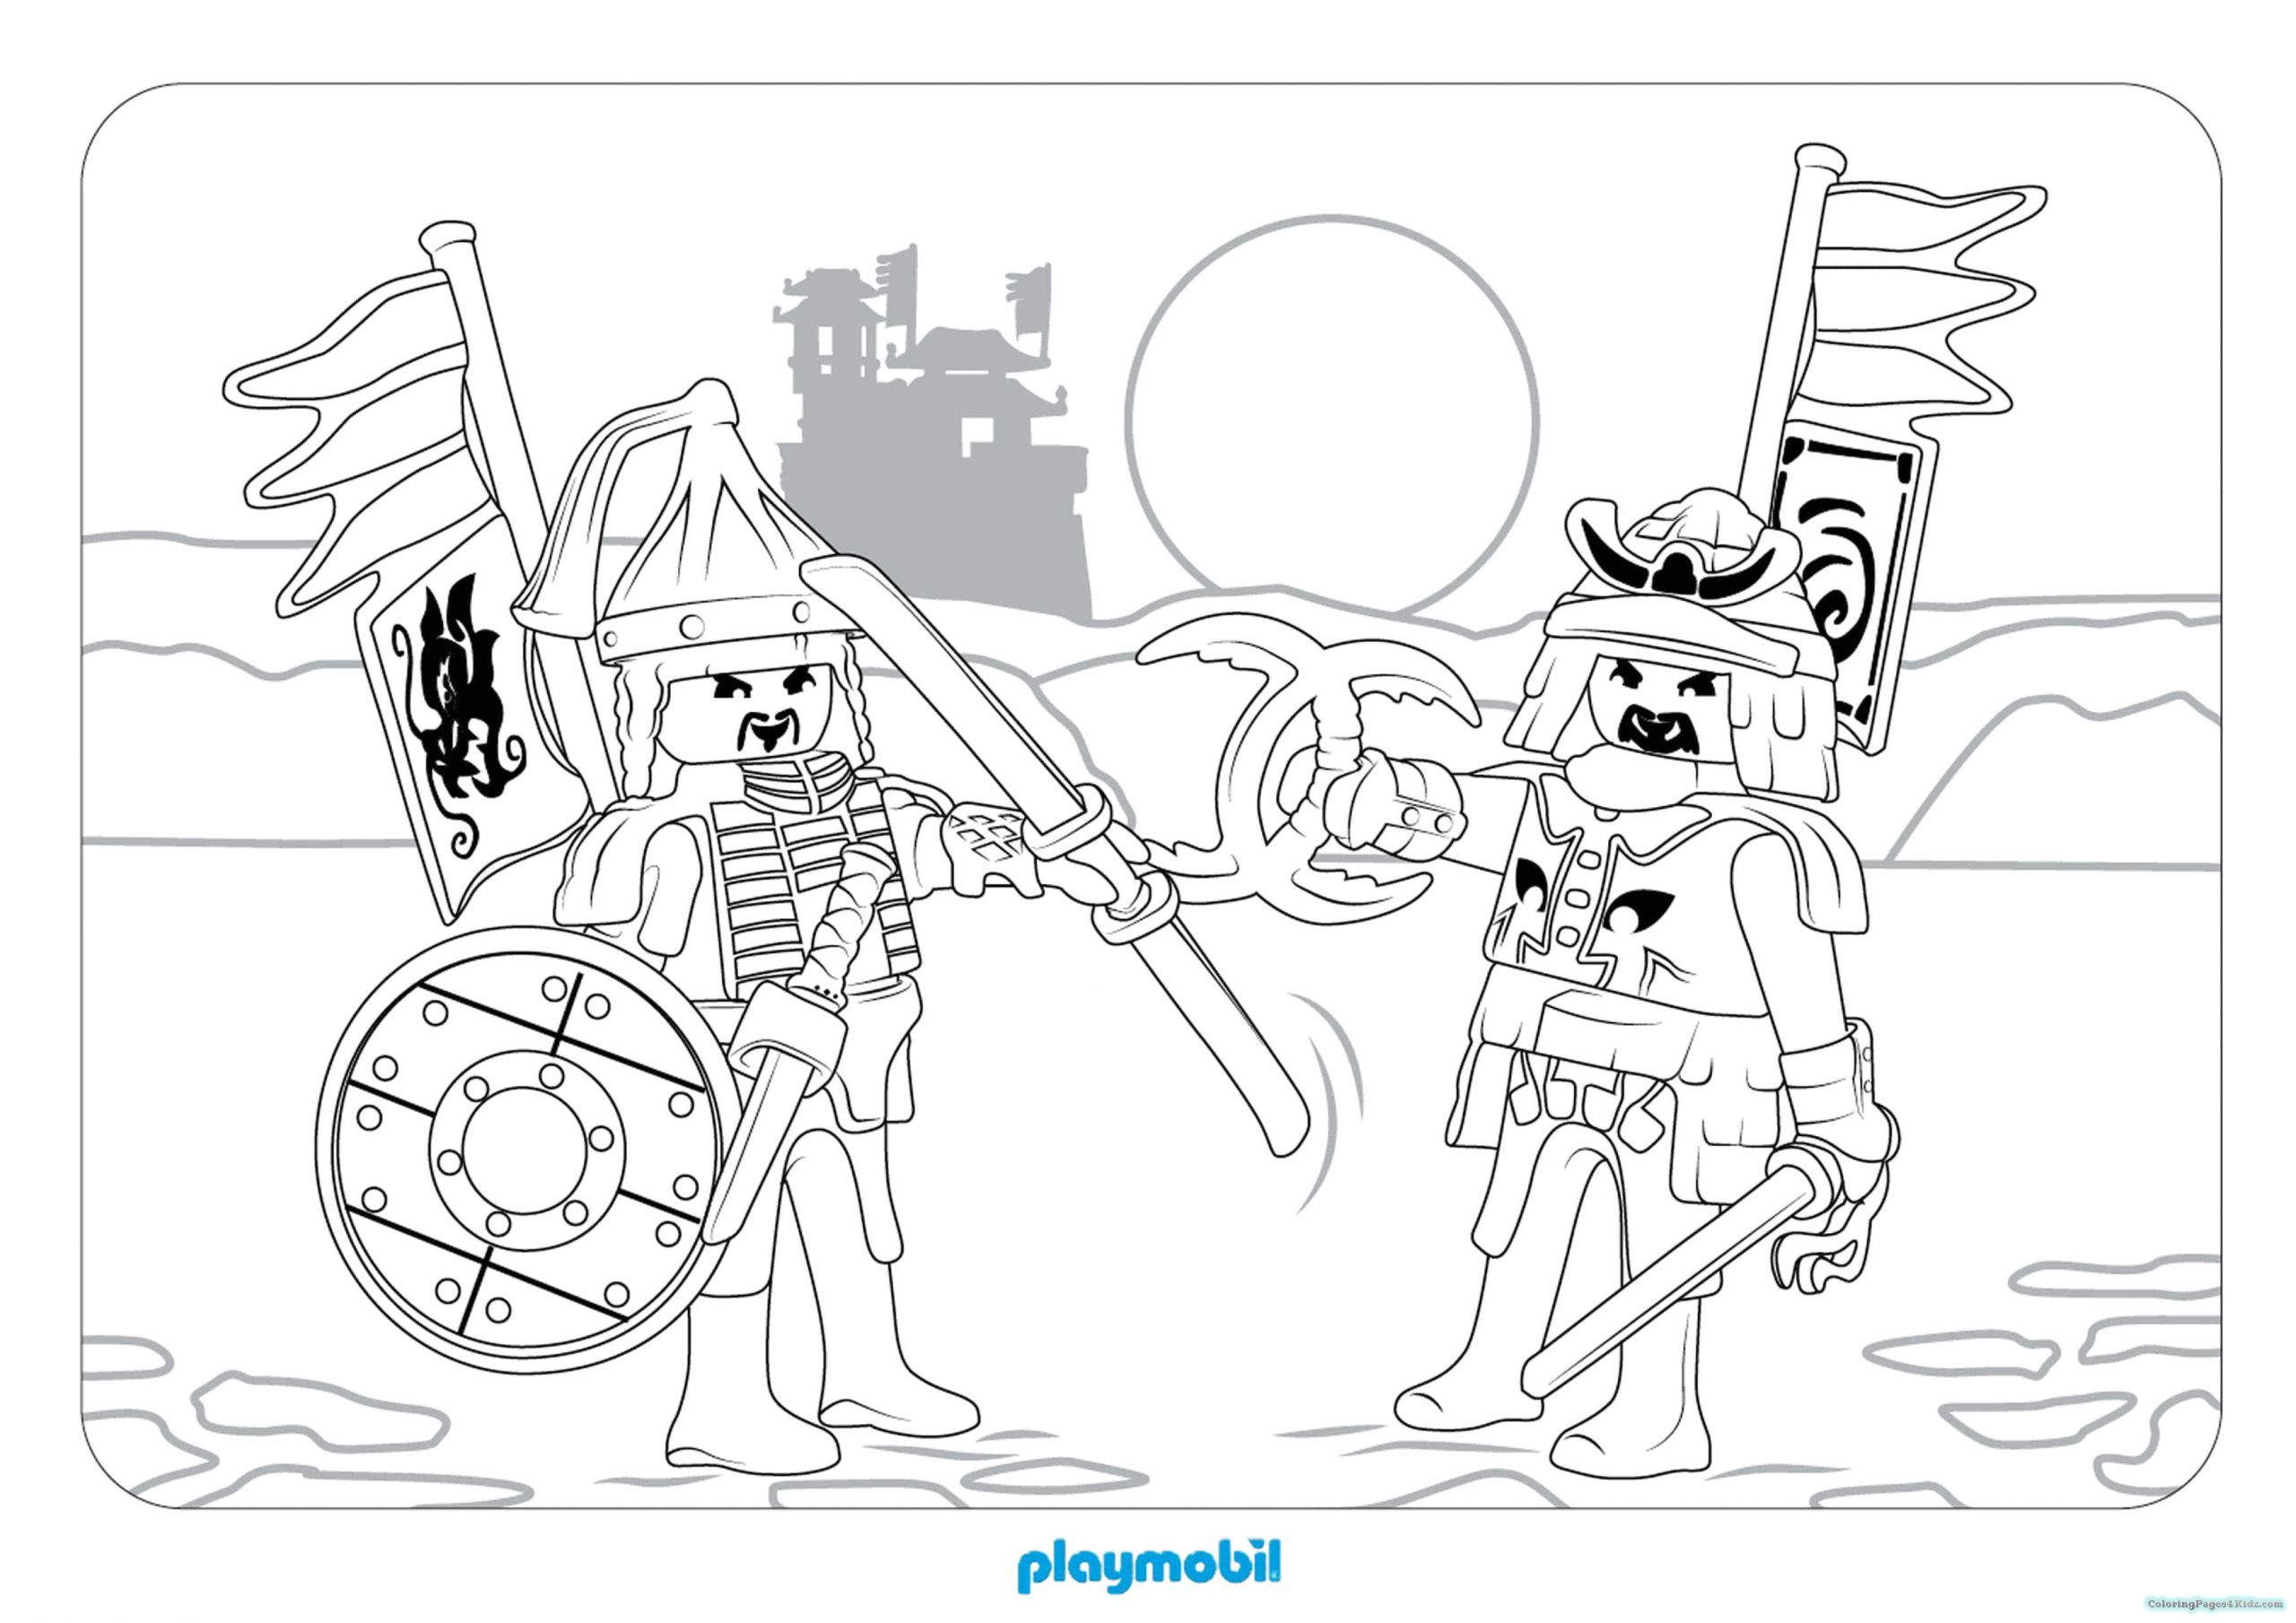 playmobil coloring pages 1027